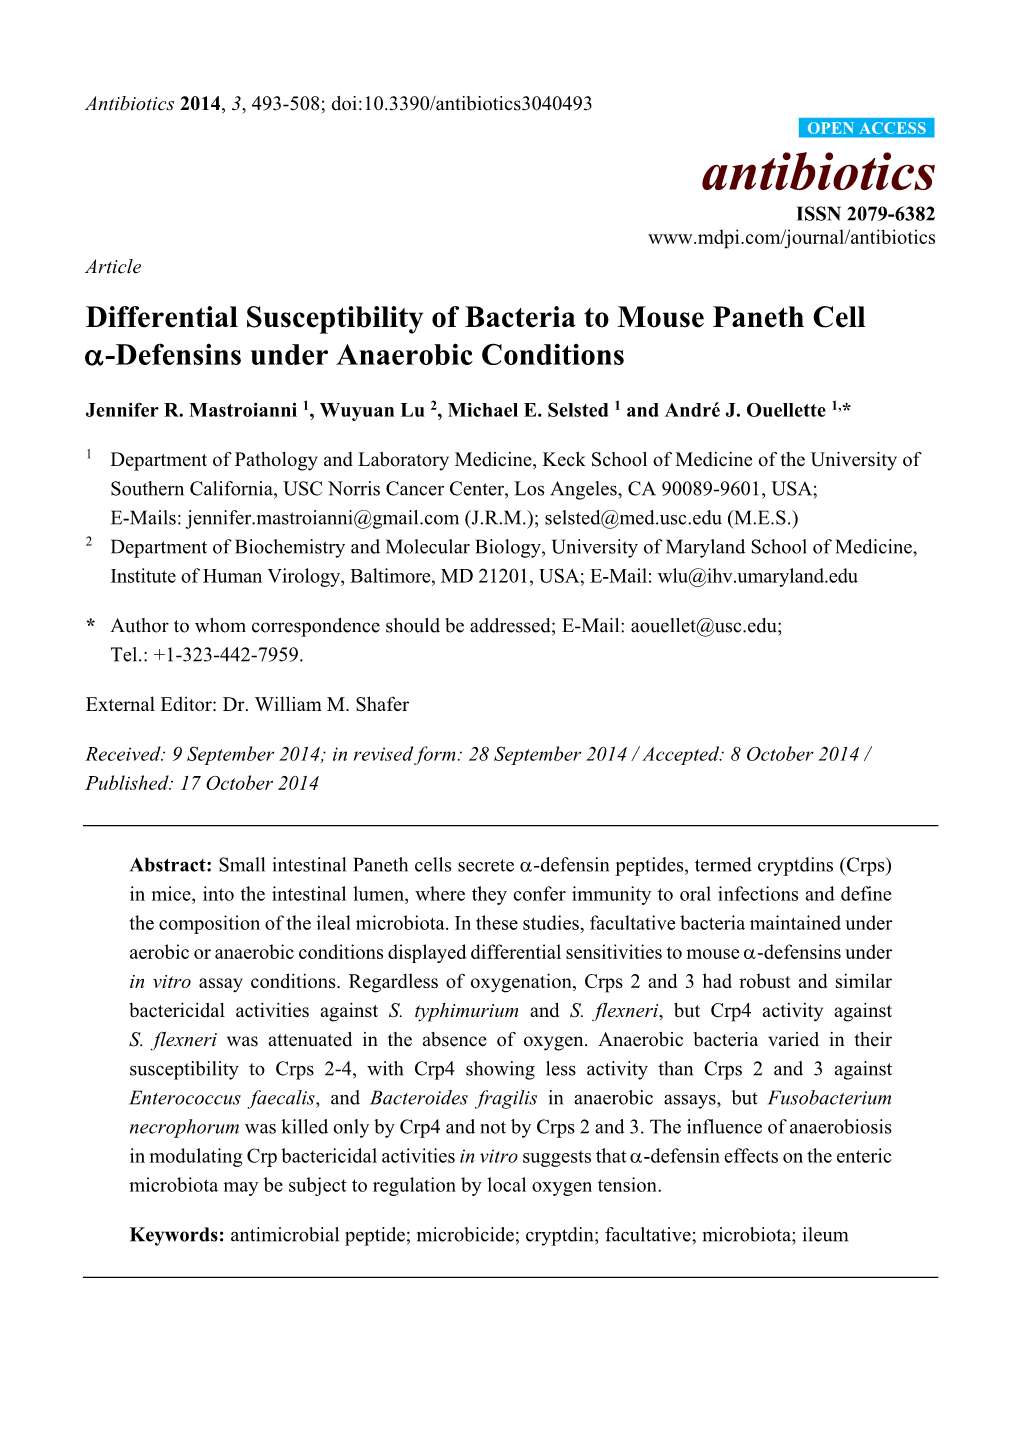 Differential Susceptibility of Bacteria to Mouse Paneth Cell -Defensins Under Anaerobic Conditions